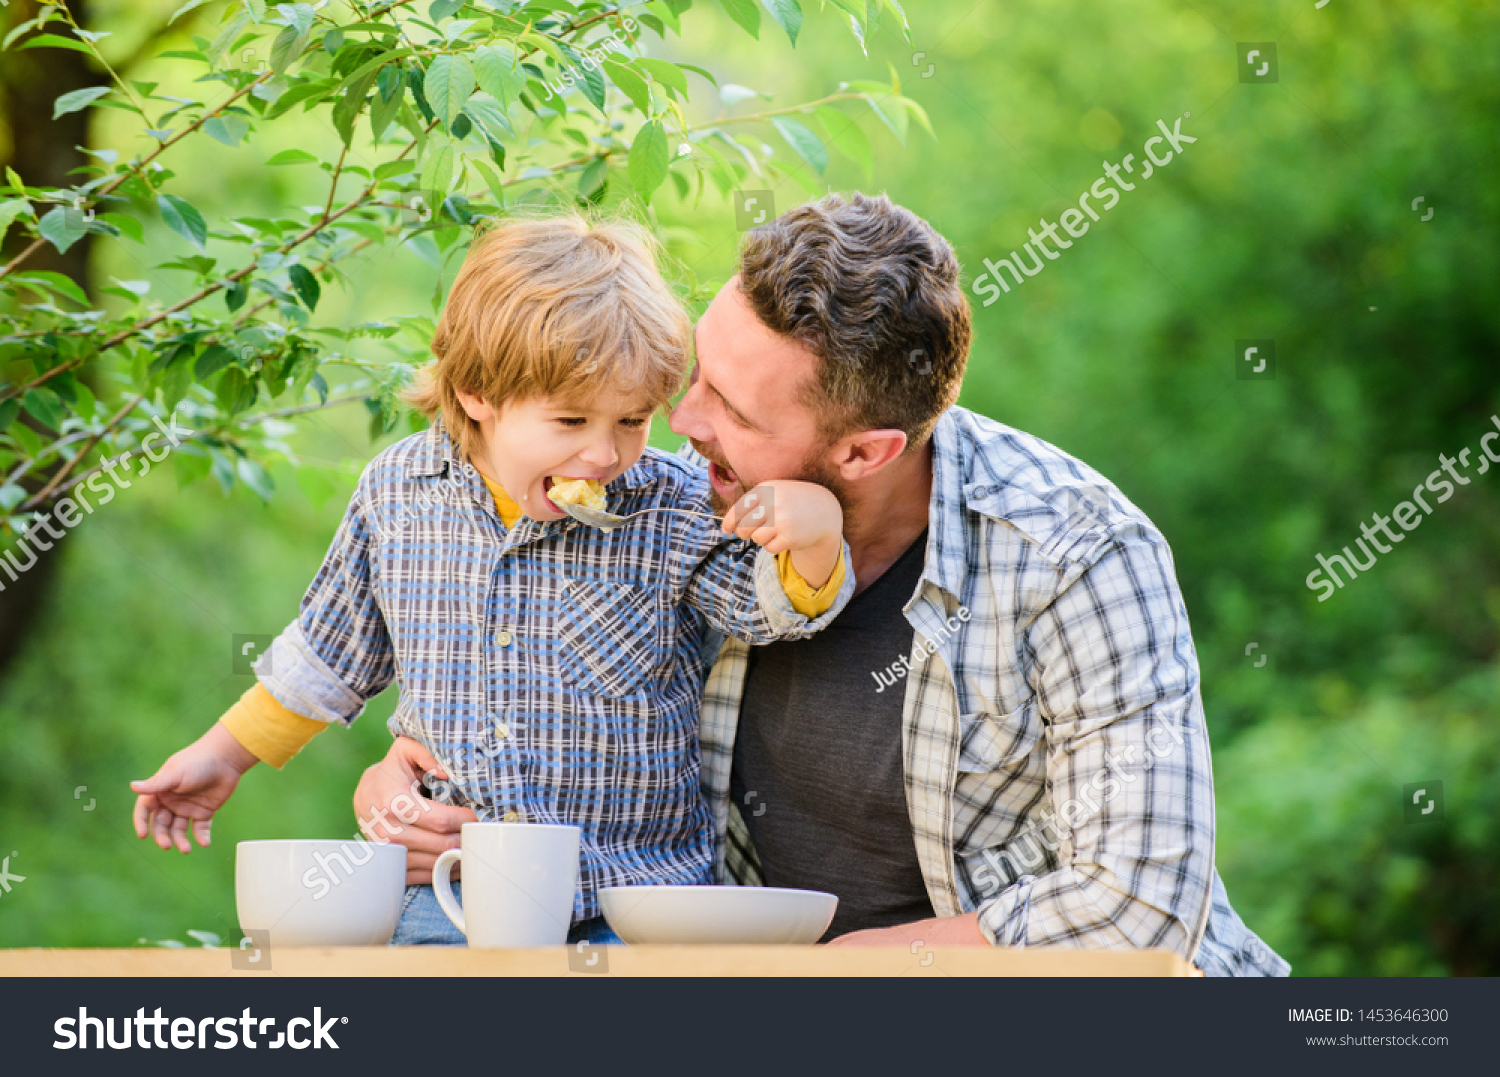 Nutrition habits. Family enjoy homemade meal. Family time. Nutrition kids and adults. Little boy and dad eat. Everything is more fun with father. Organic nutrition. Healthy nutrition concept. #1453646300